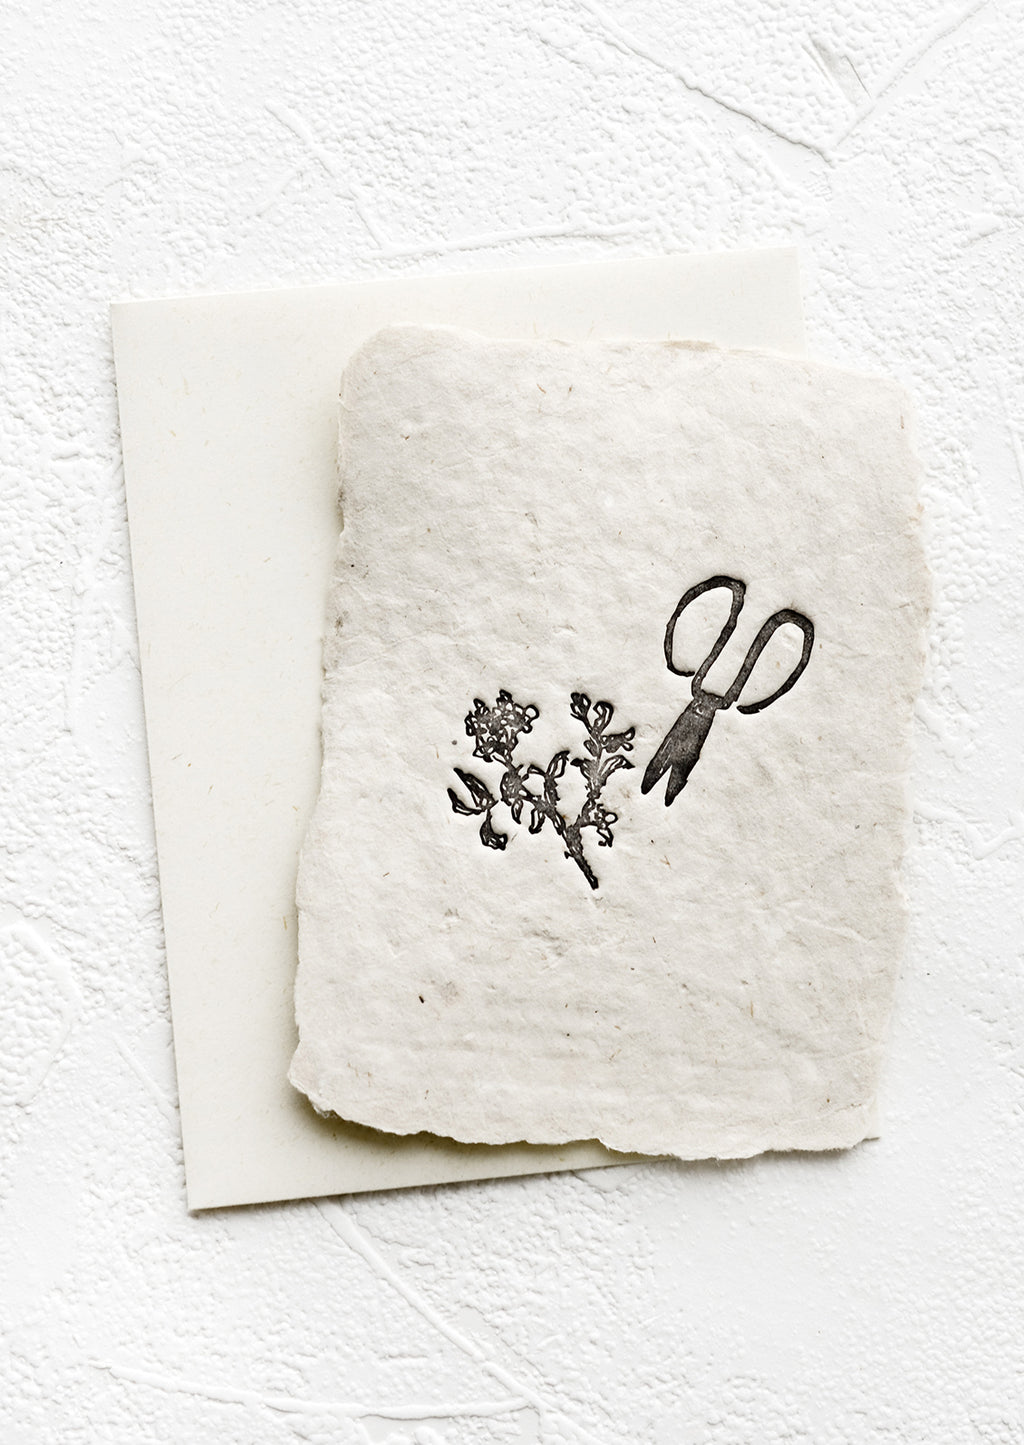 1: A greeting card made from handmade paper with a letterpress printed image of garden shears.